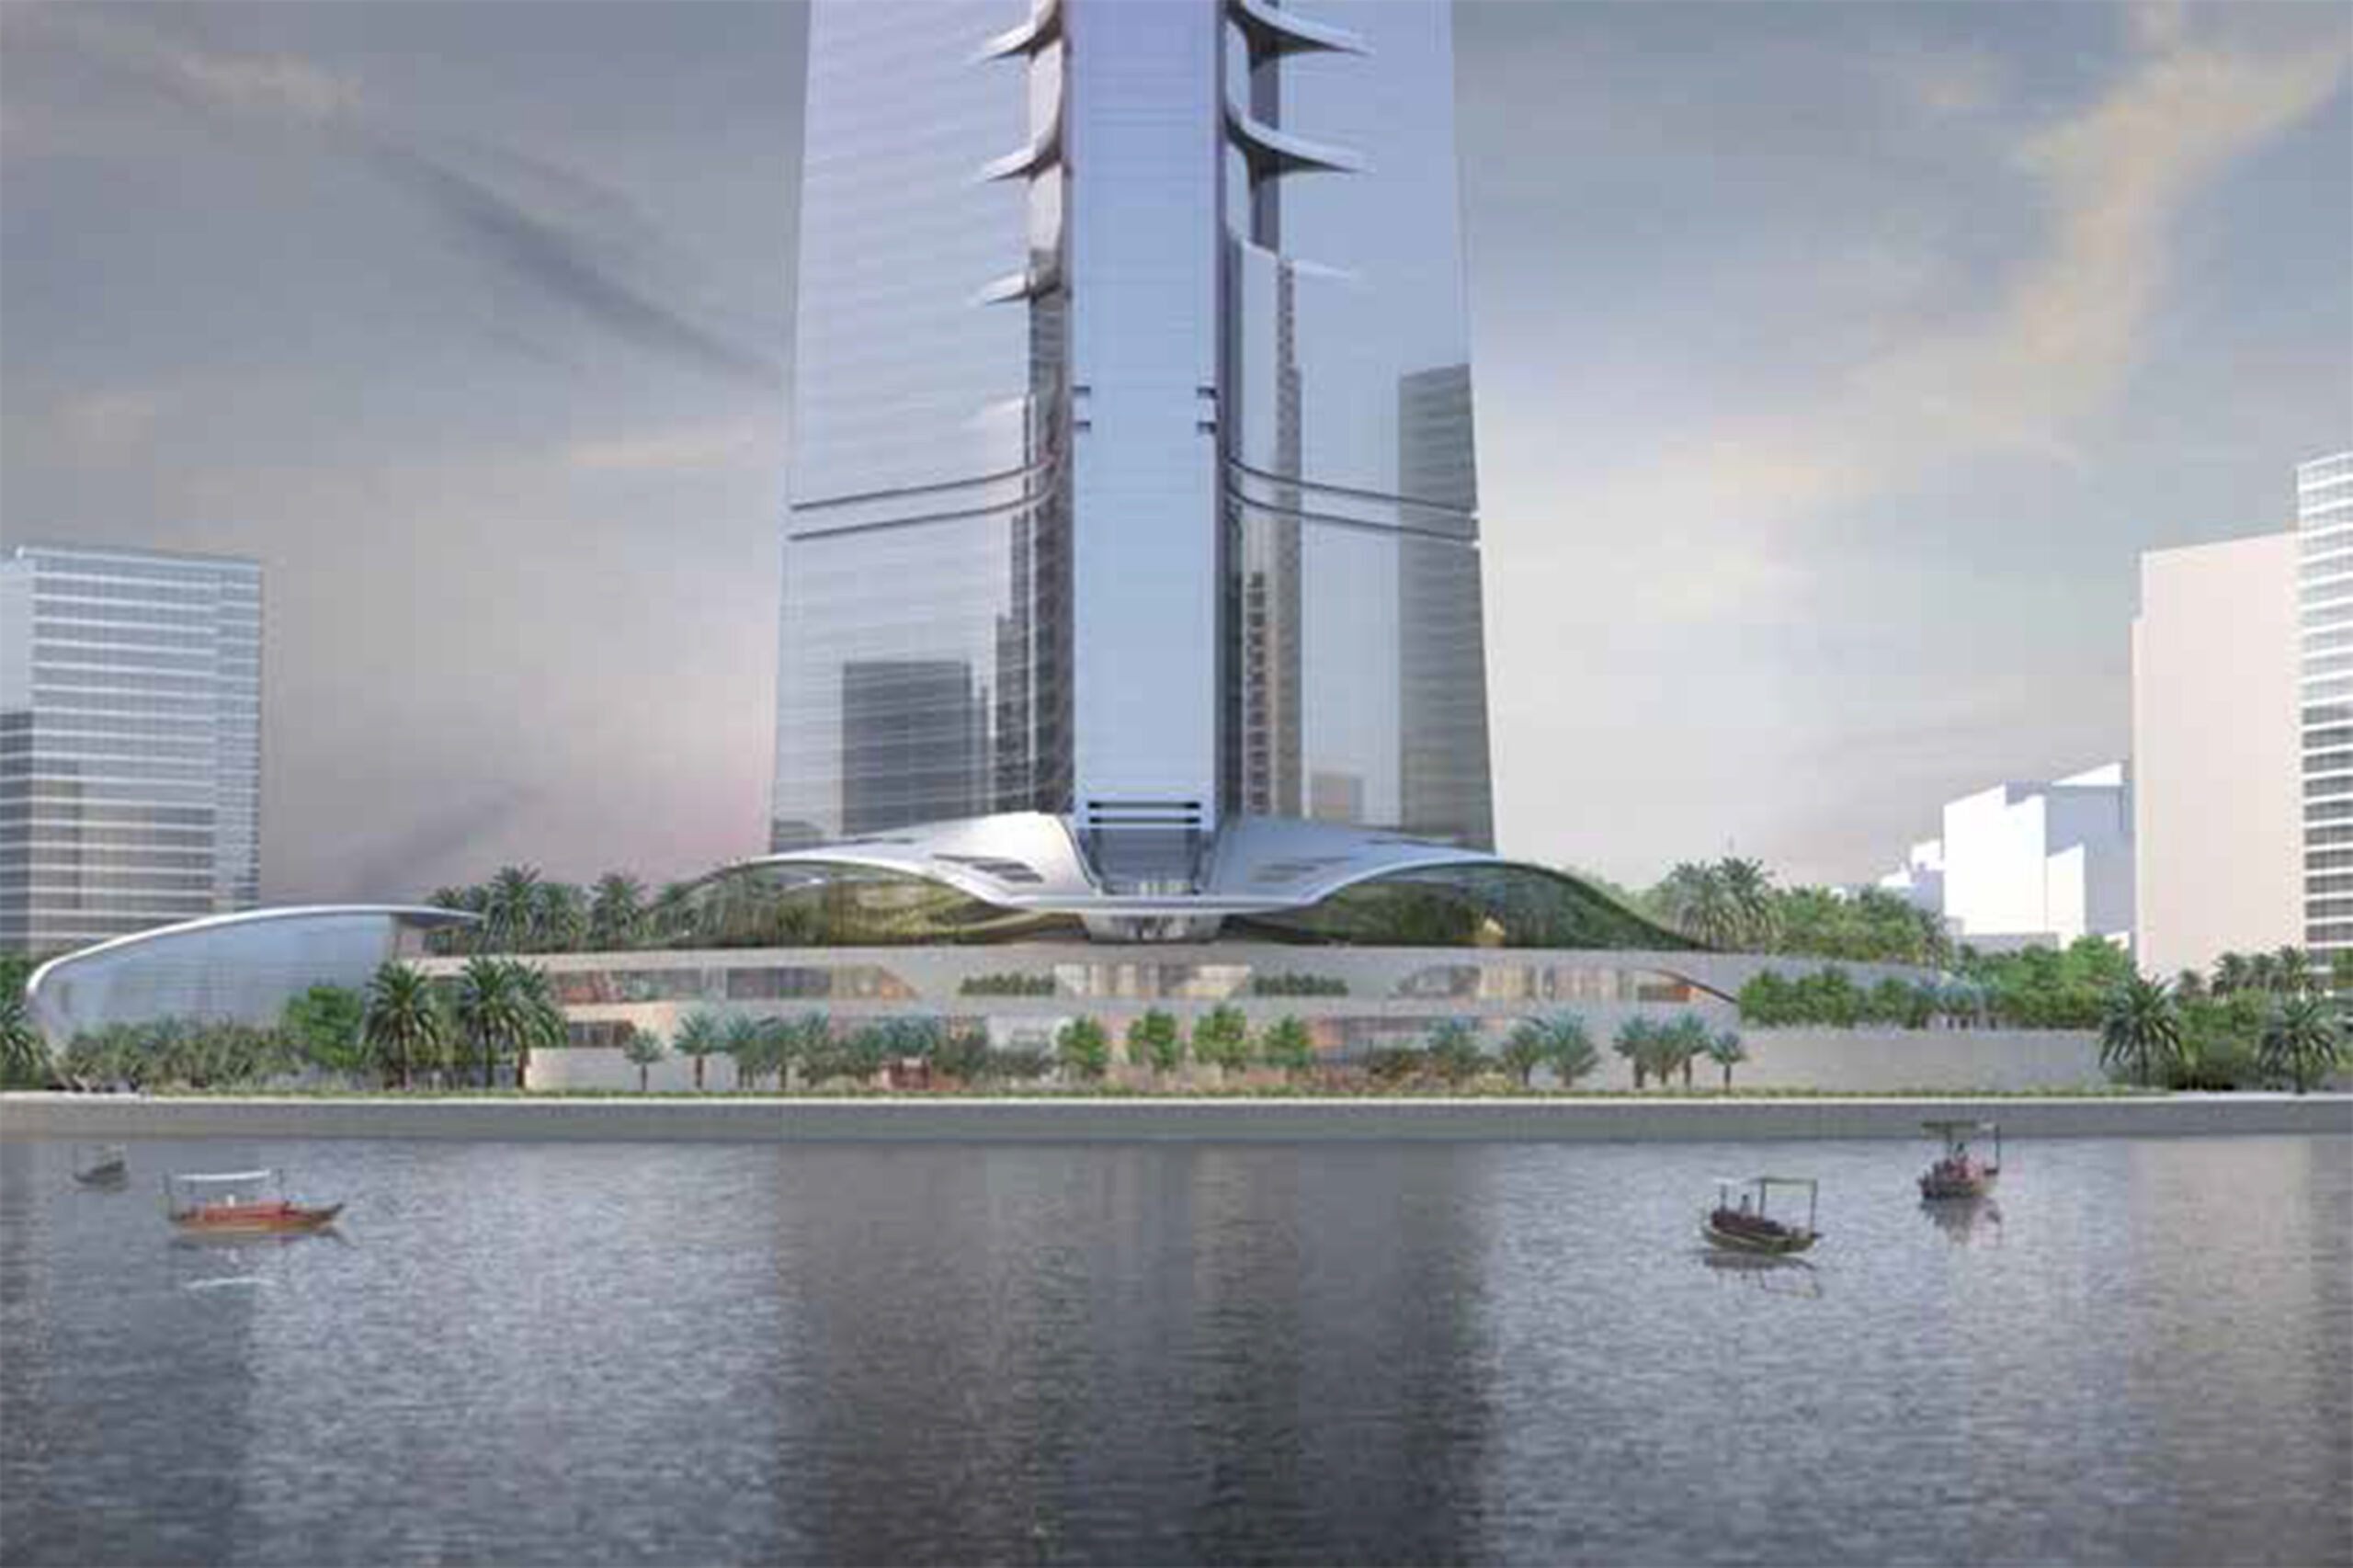 Jeddah Tower Skyscraper of the Future! The Arch Insider